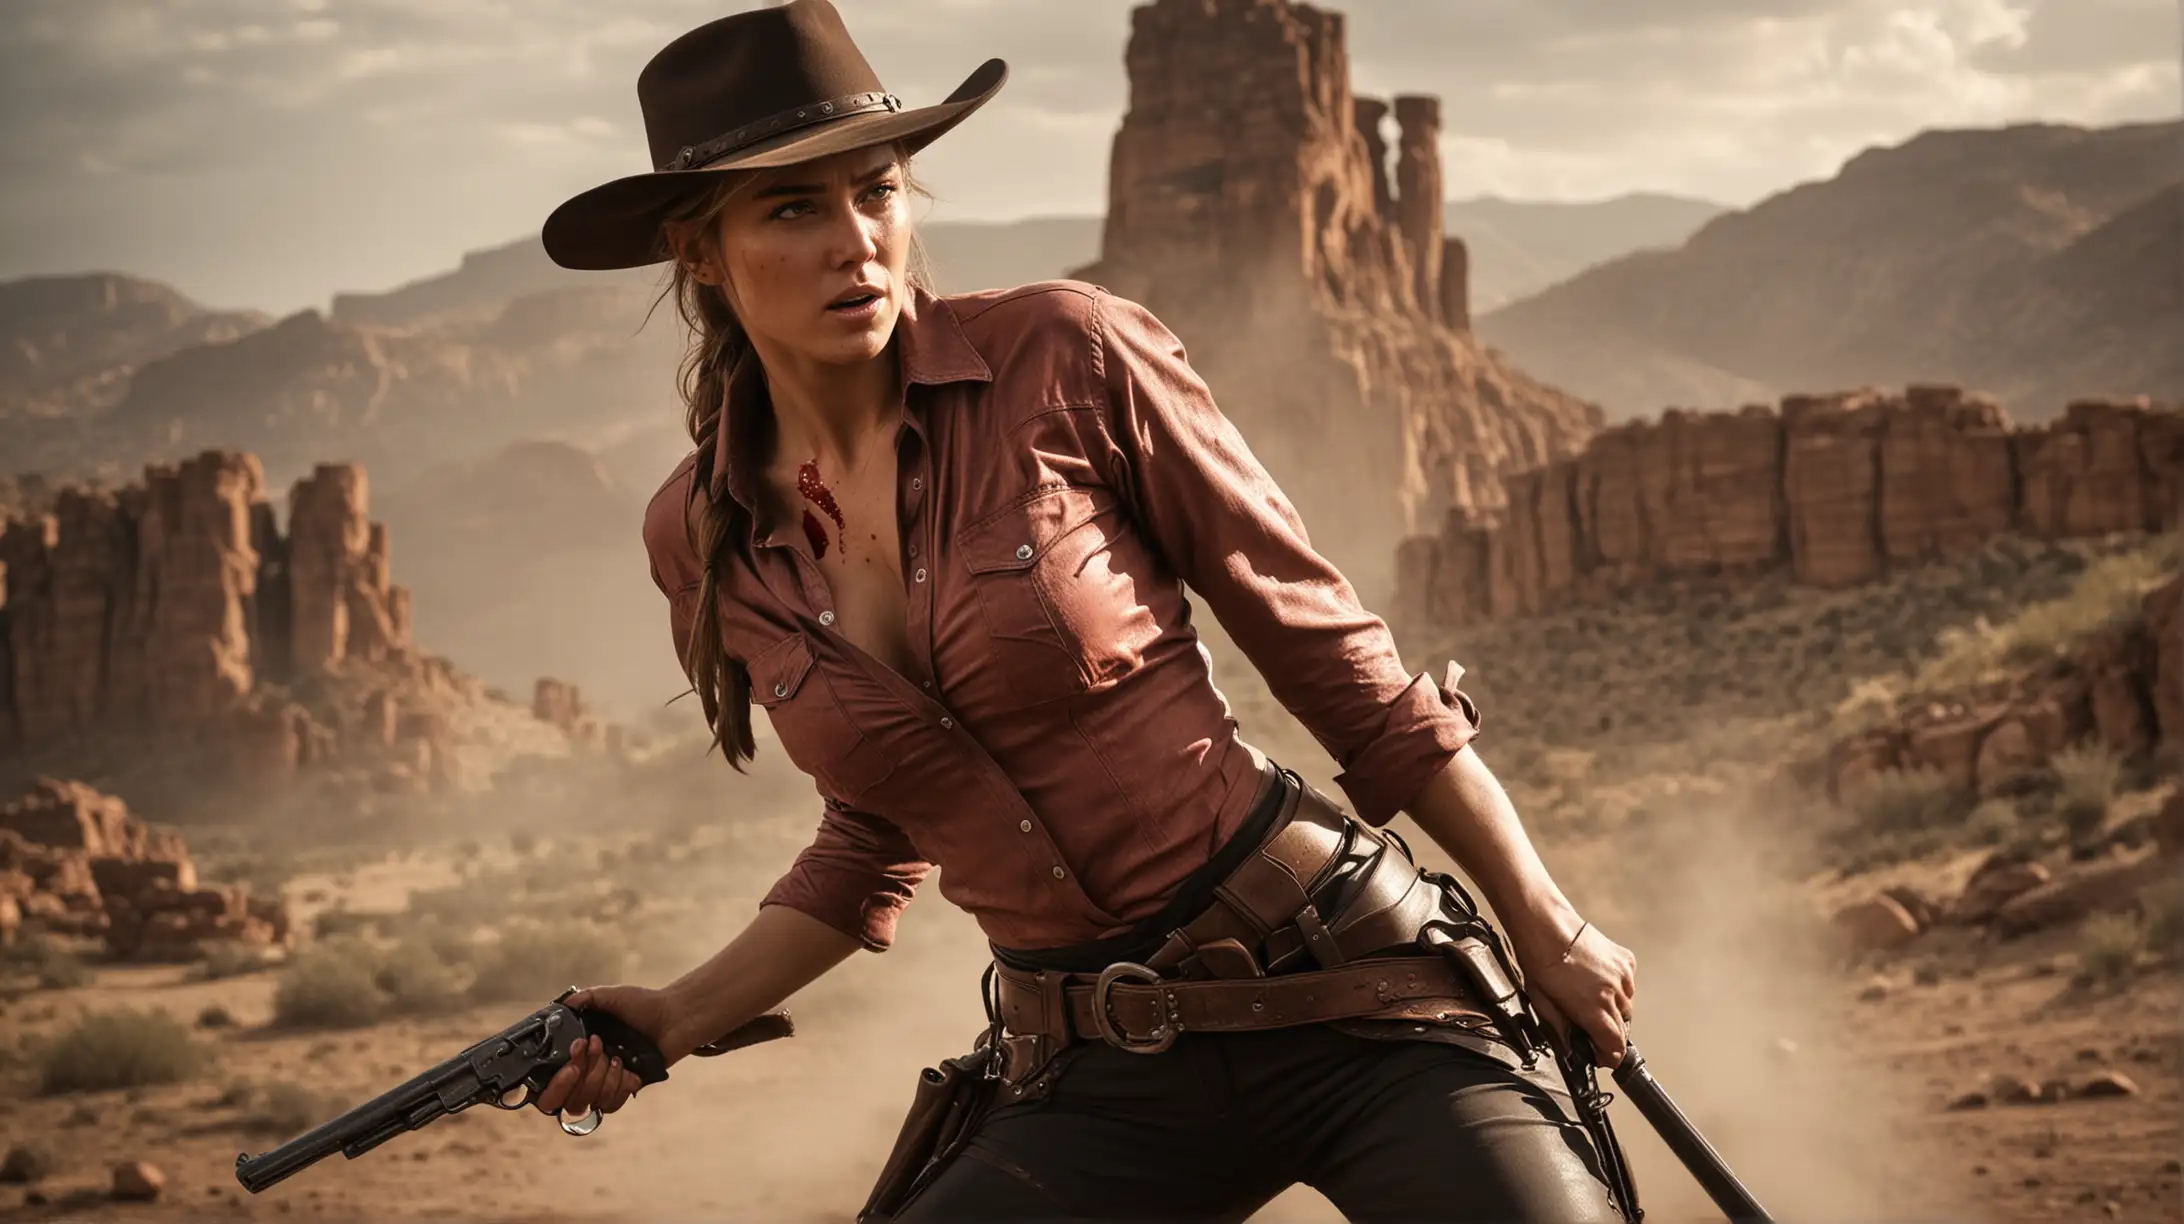 Intense WesternStyle Action Scene with Hot Female Lead